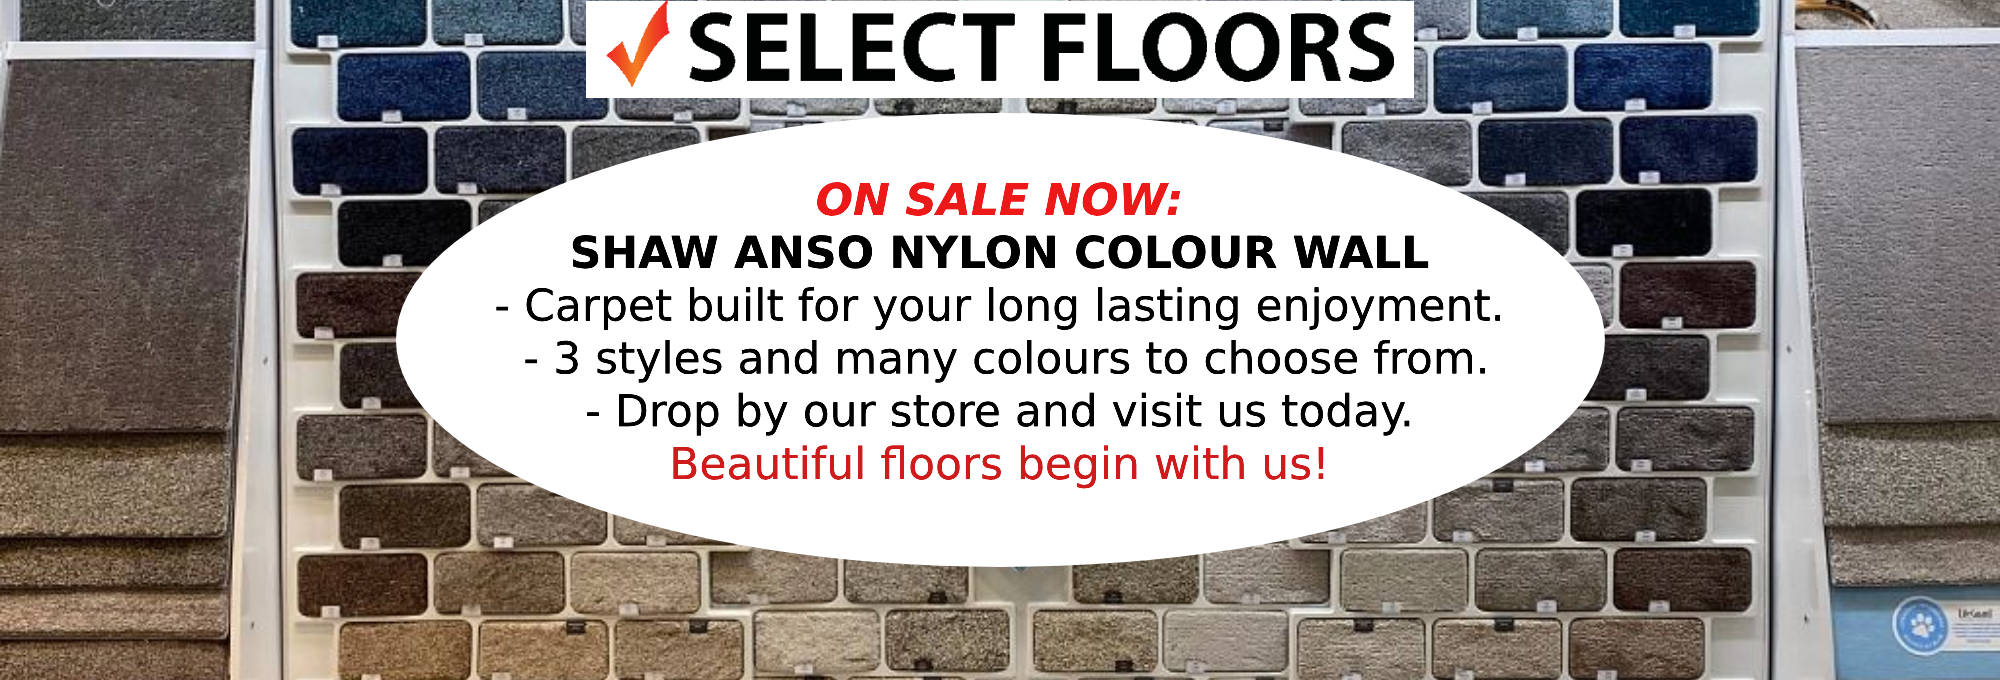 Select Floors AB - Promotional Sale on ANSO Nylon Carpet ColorWall Products